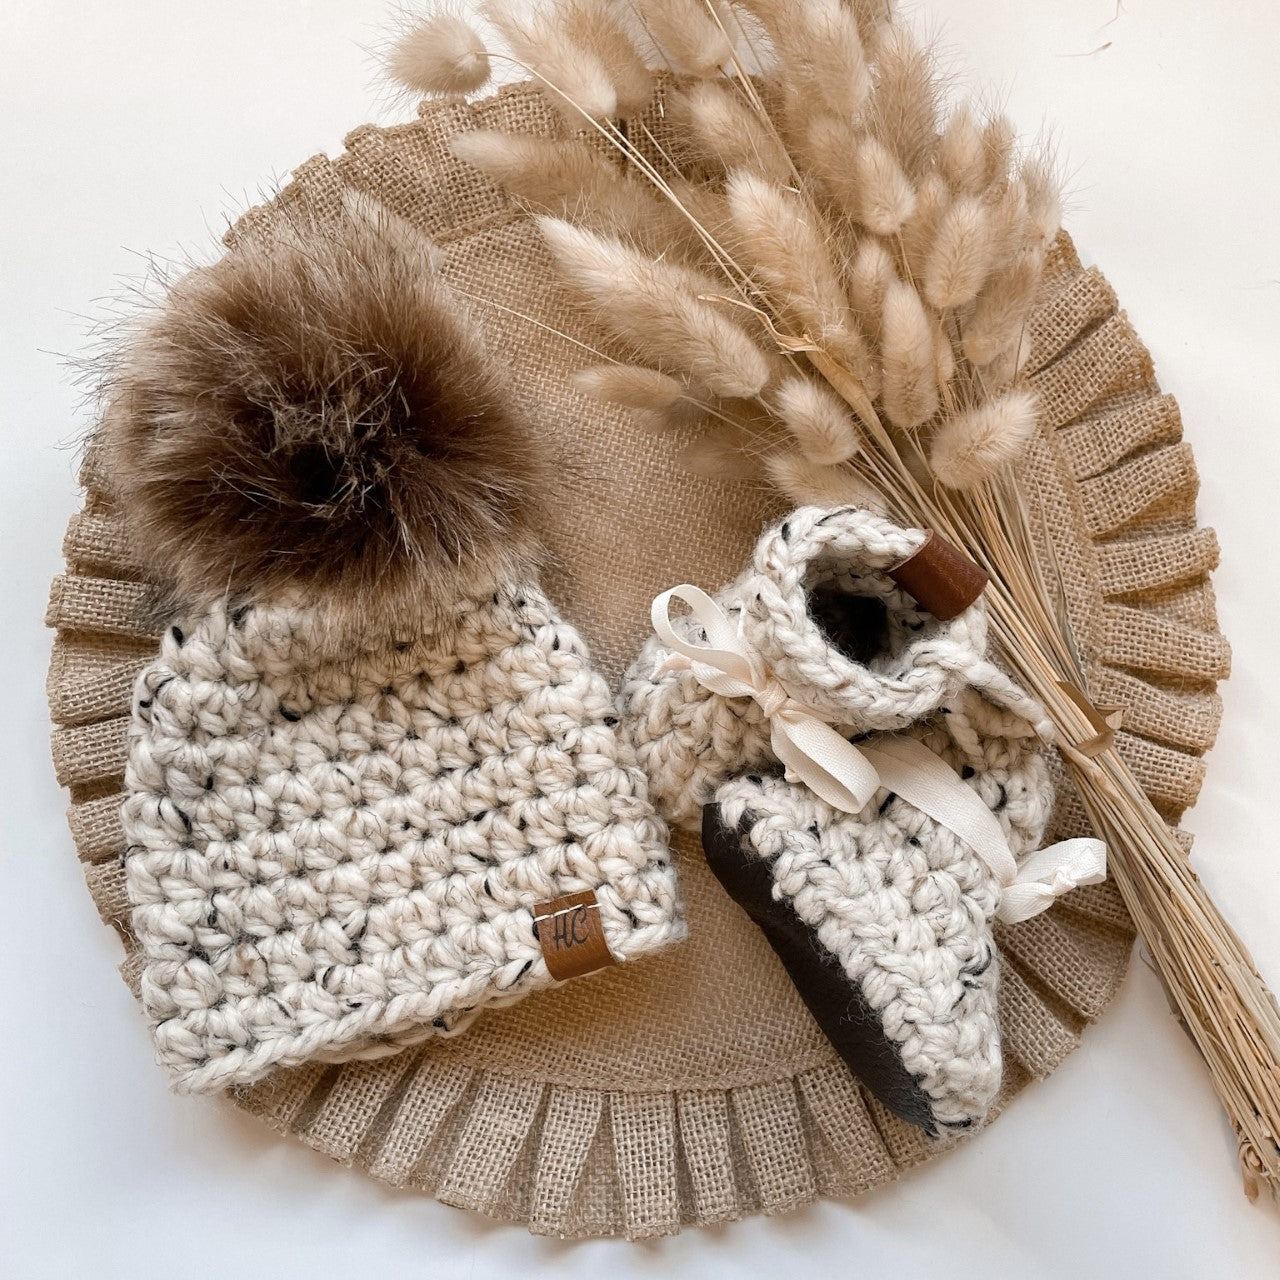 Handcrafted Crochet items